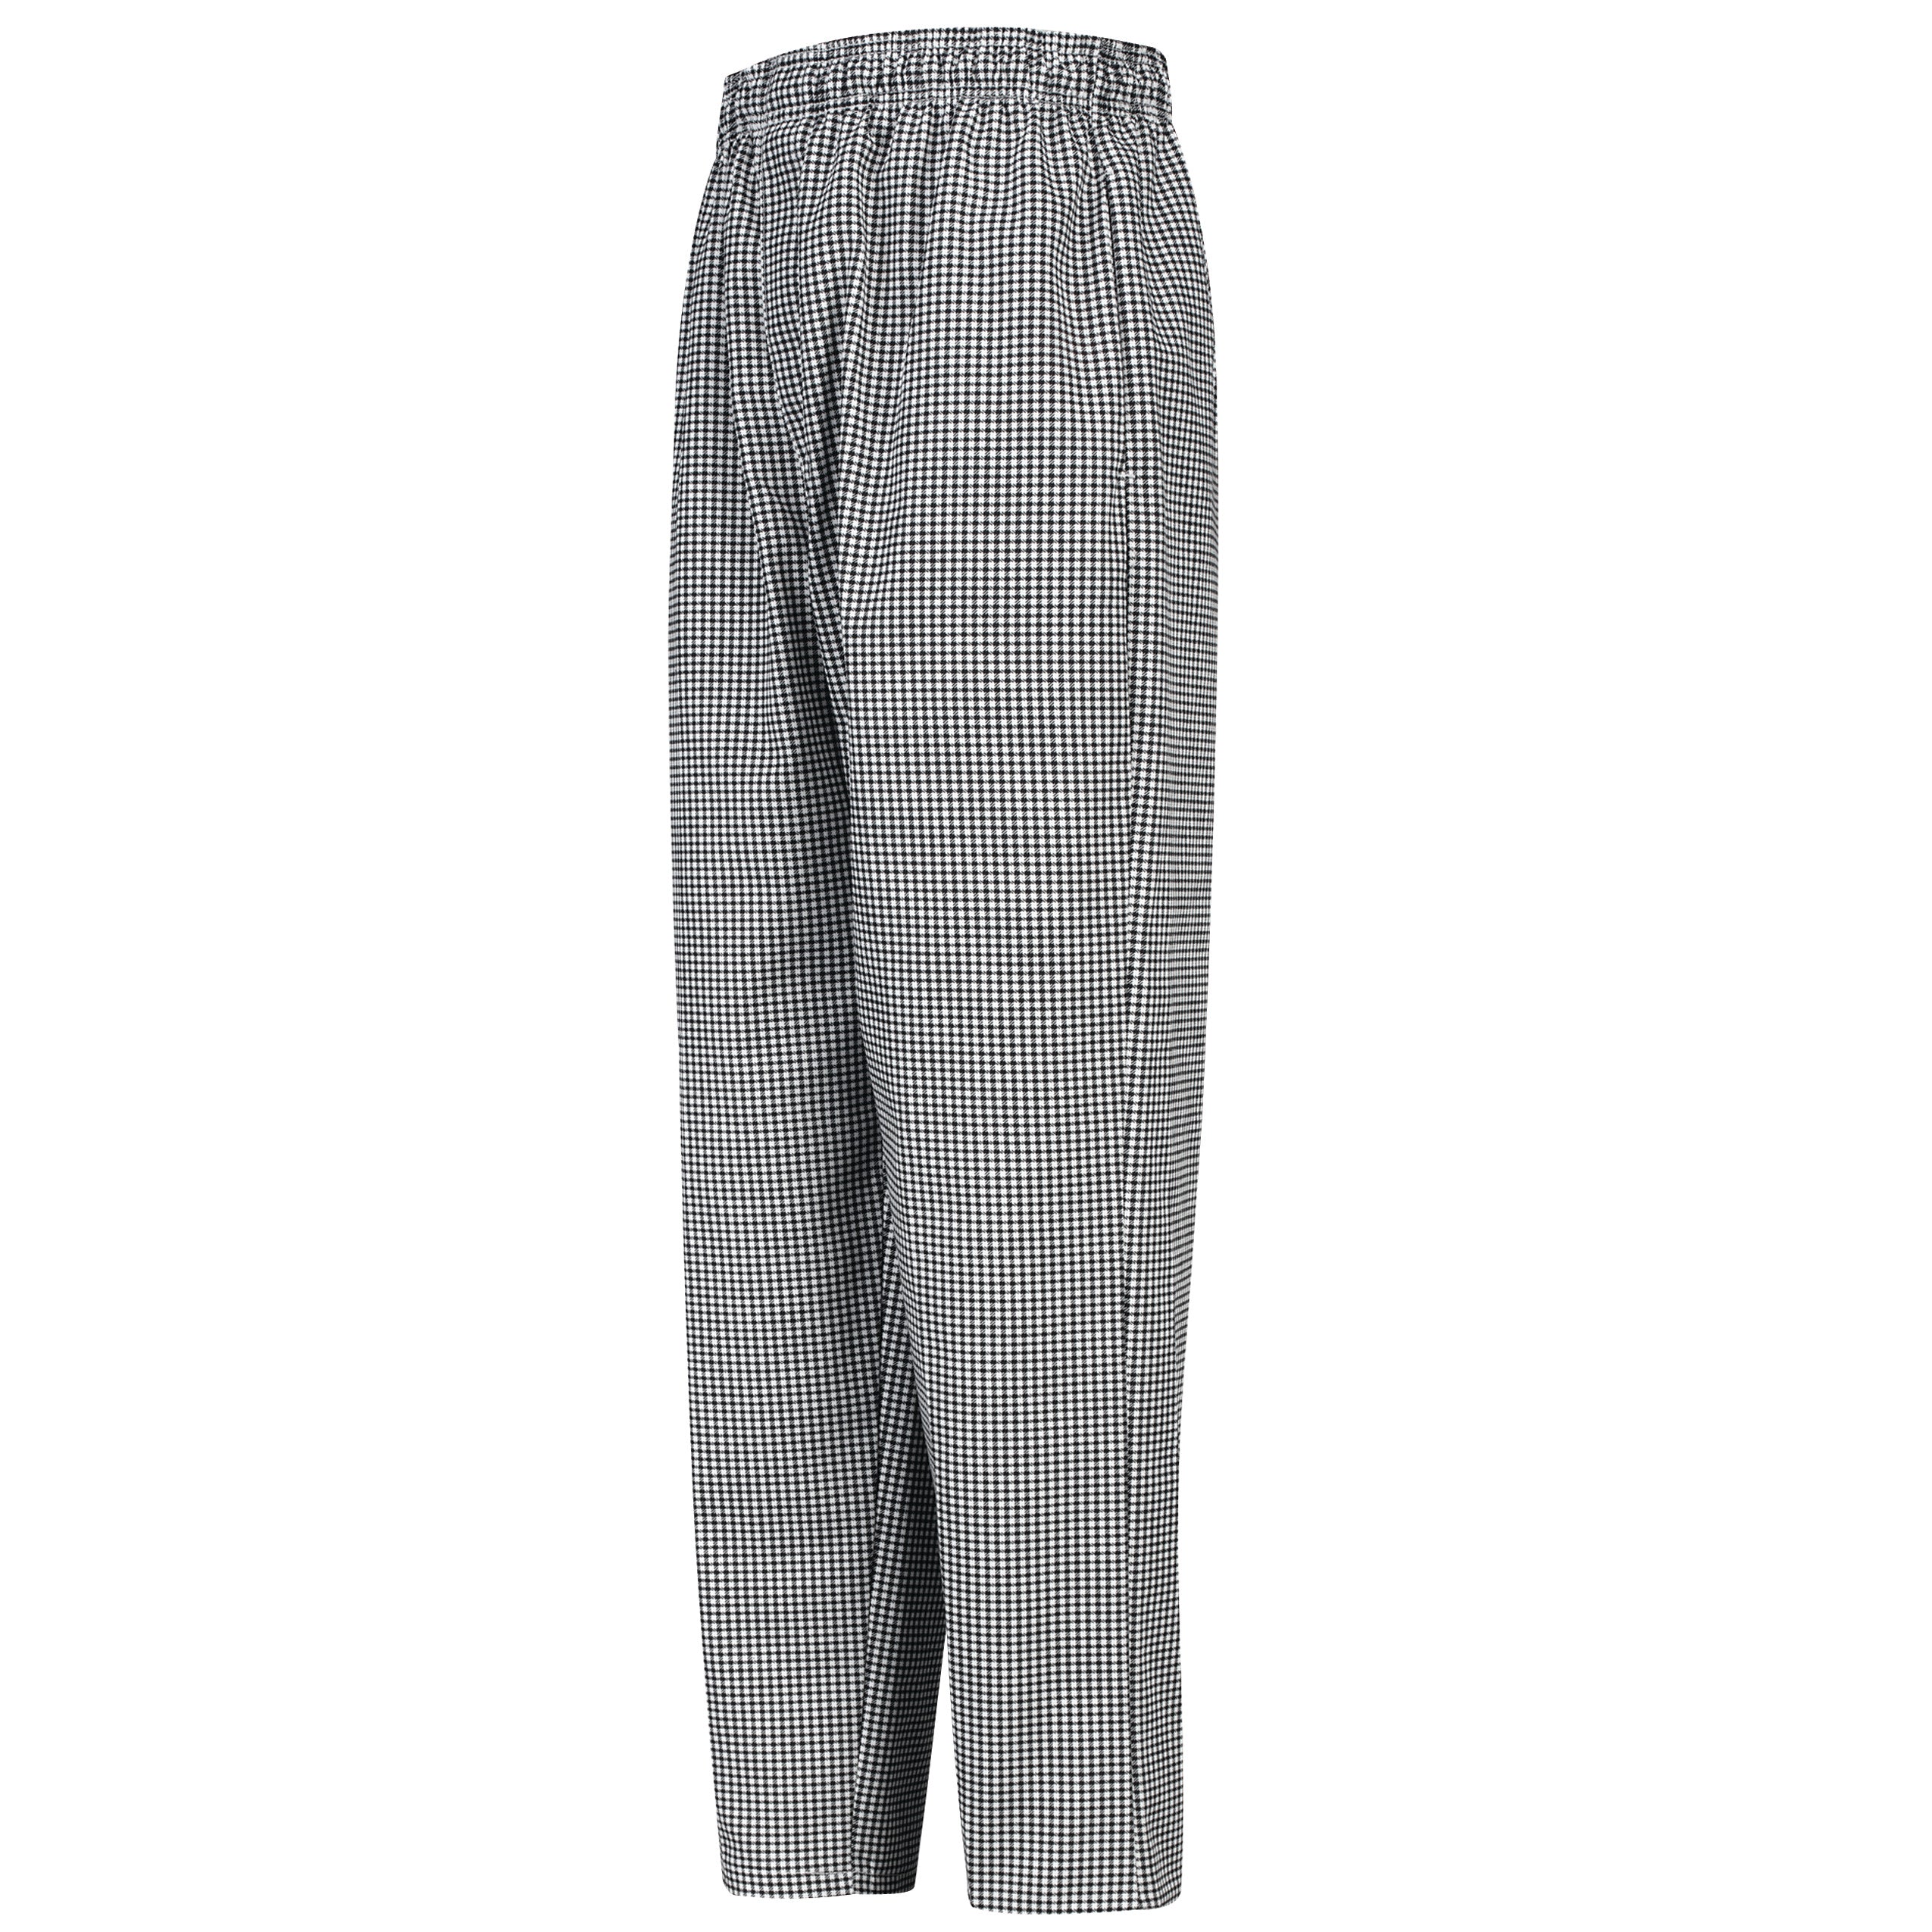 Men's Checked Baggy Chef Pant 5360 - Black/White Check-eSafety Supplies, Inc